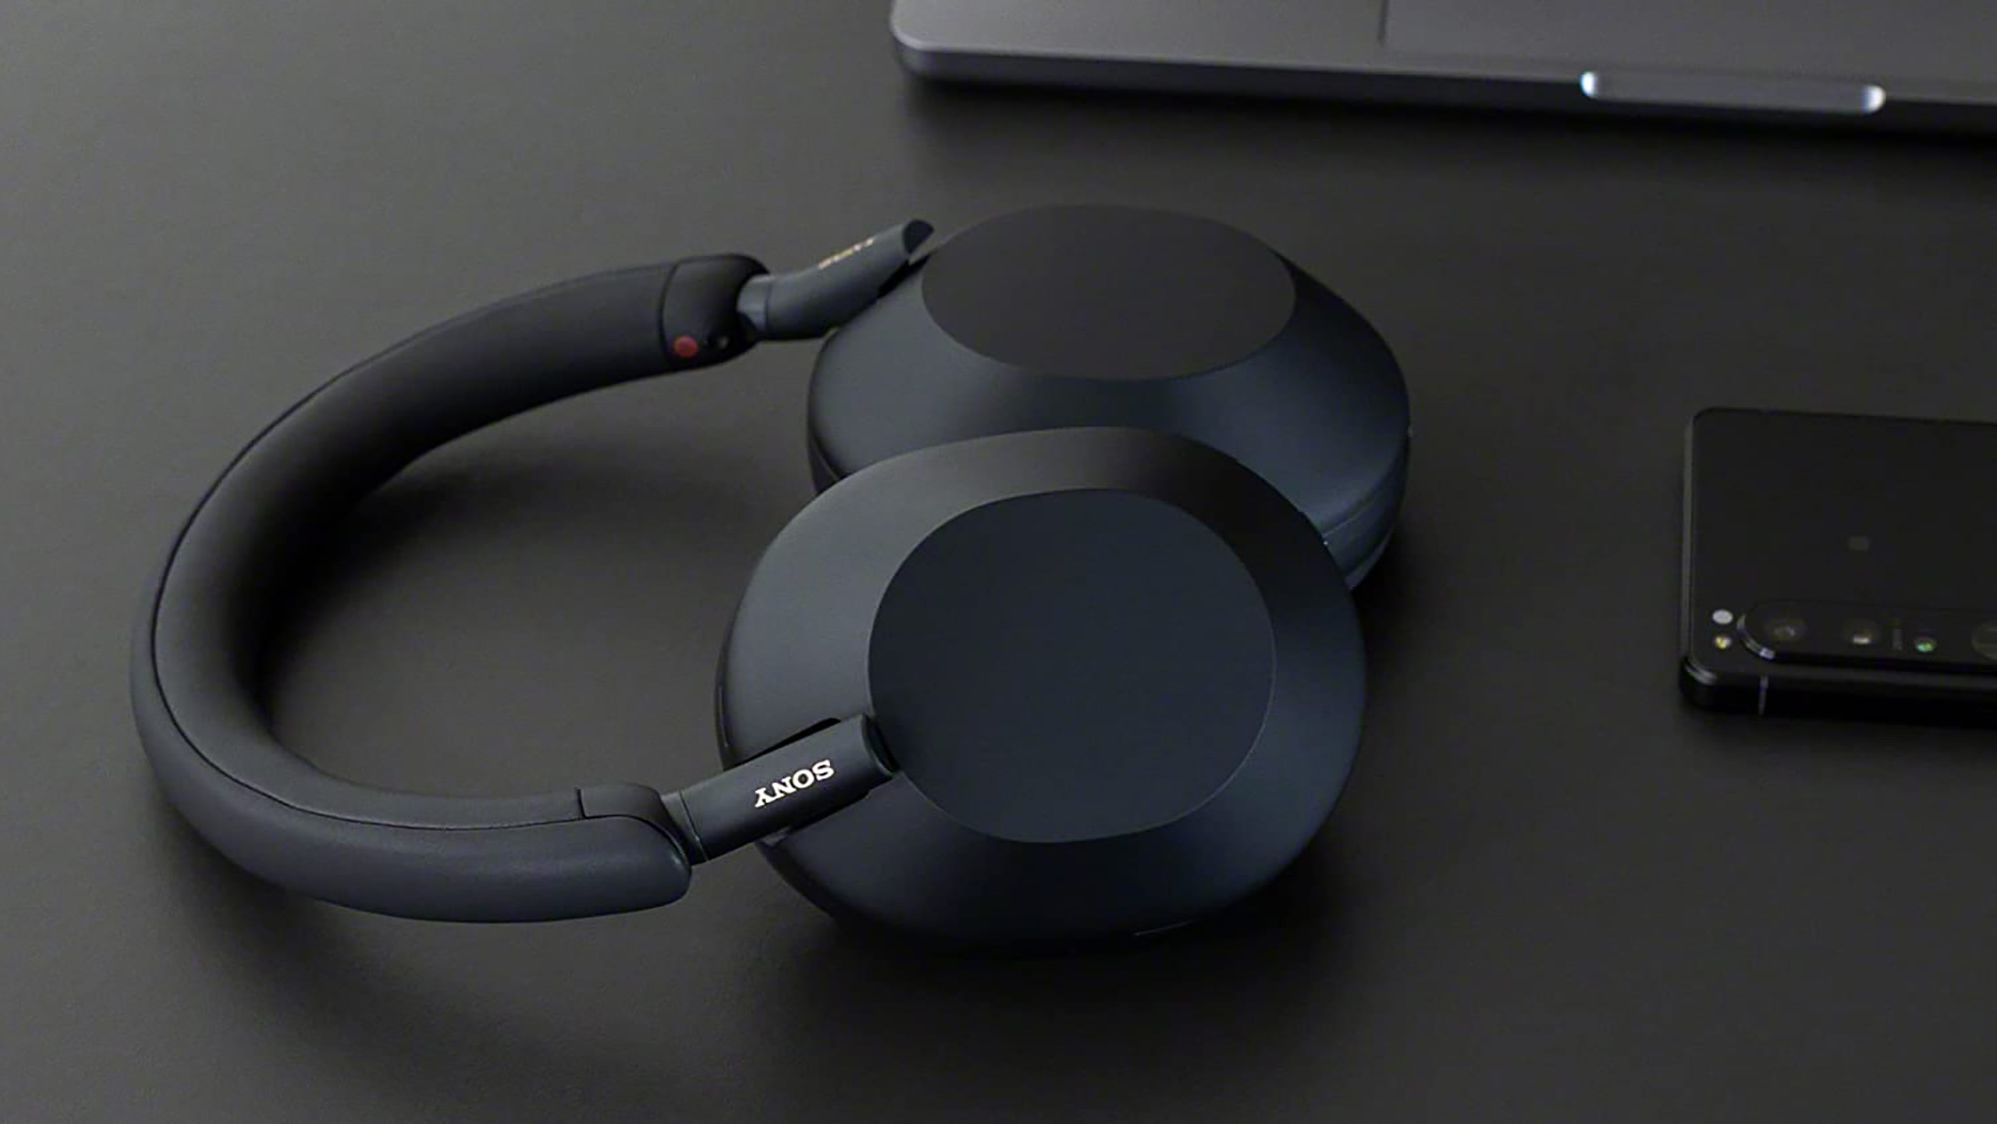 Insane deal gets you Sony WH-1000XM5 headphones for $280